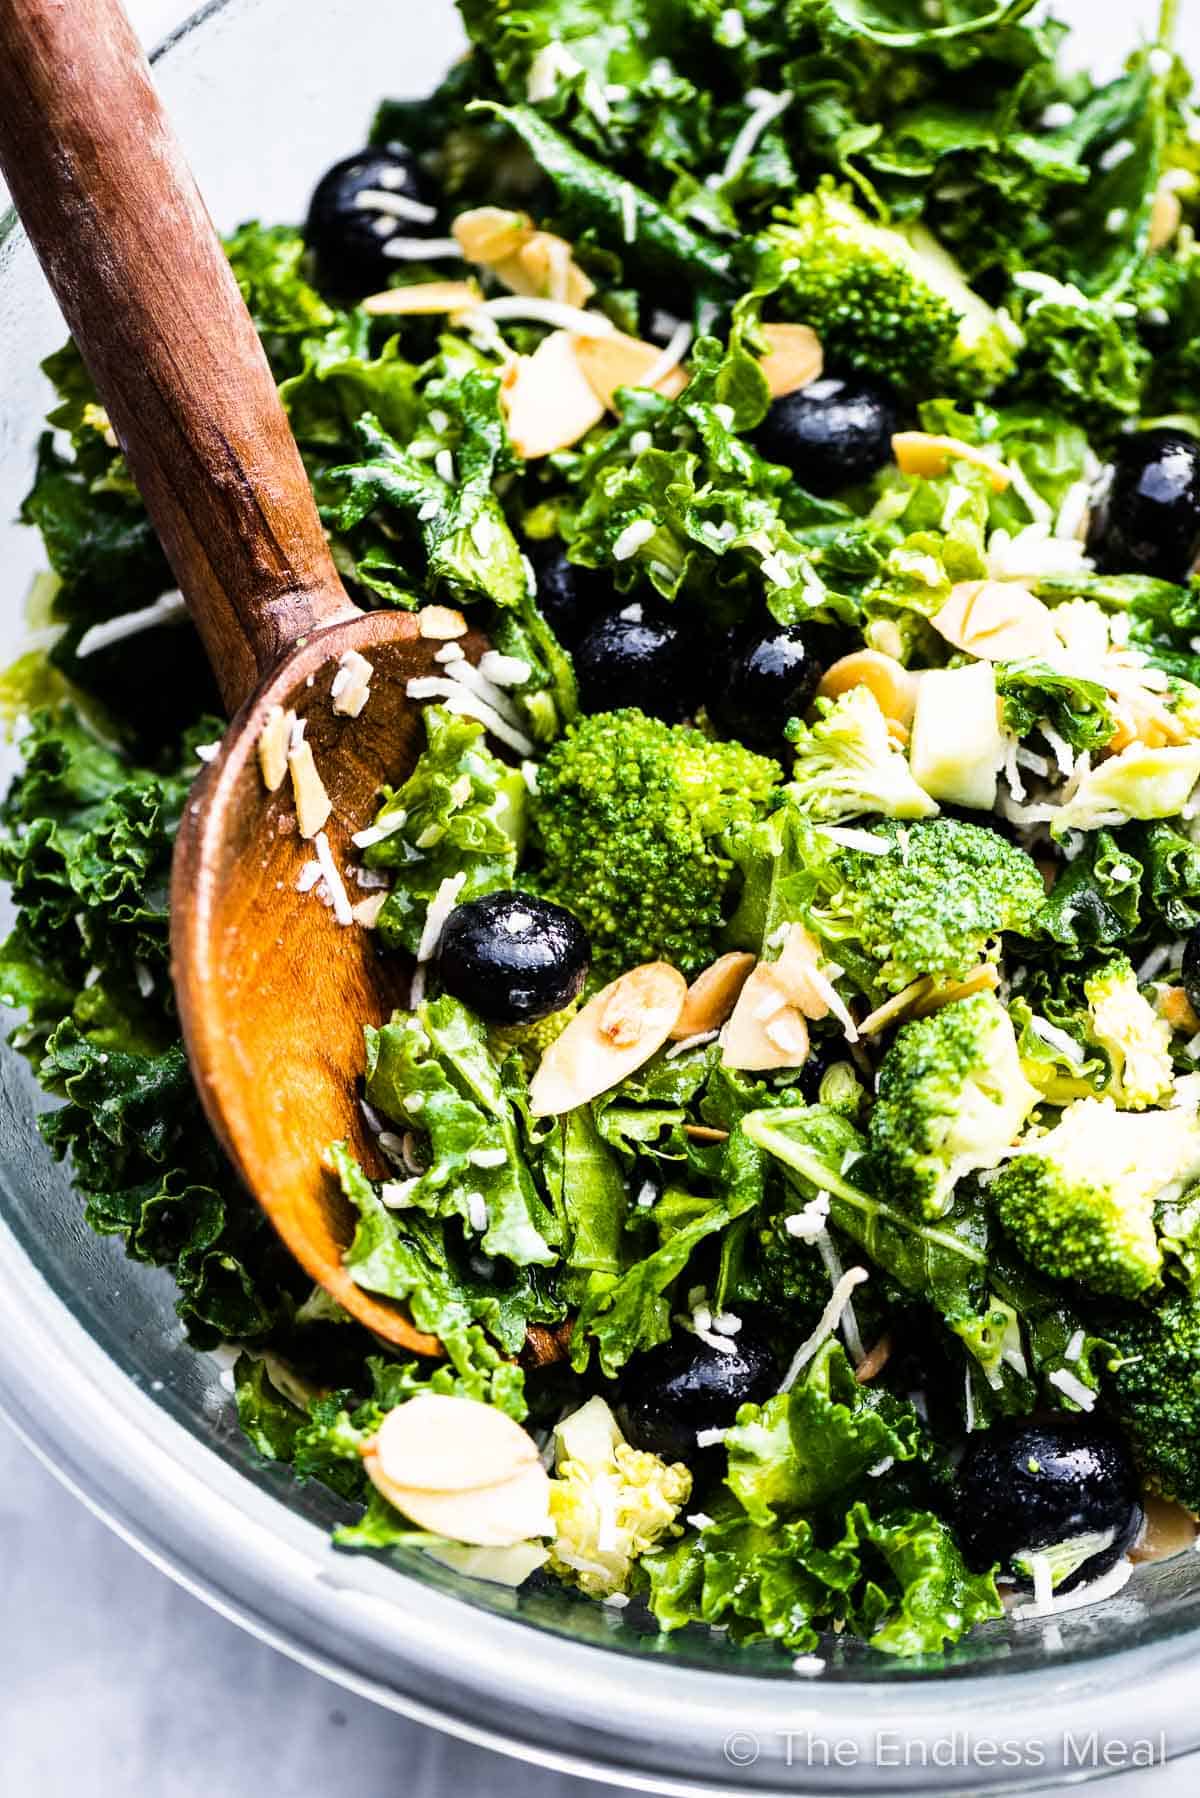 A close up of kale broccoli salad in a salad bowl.